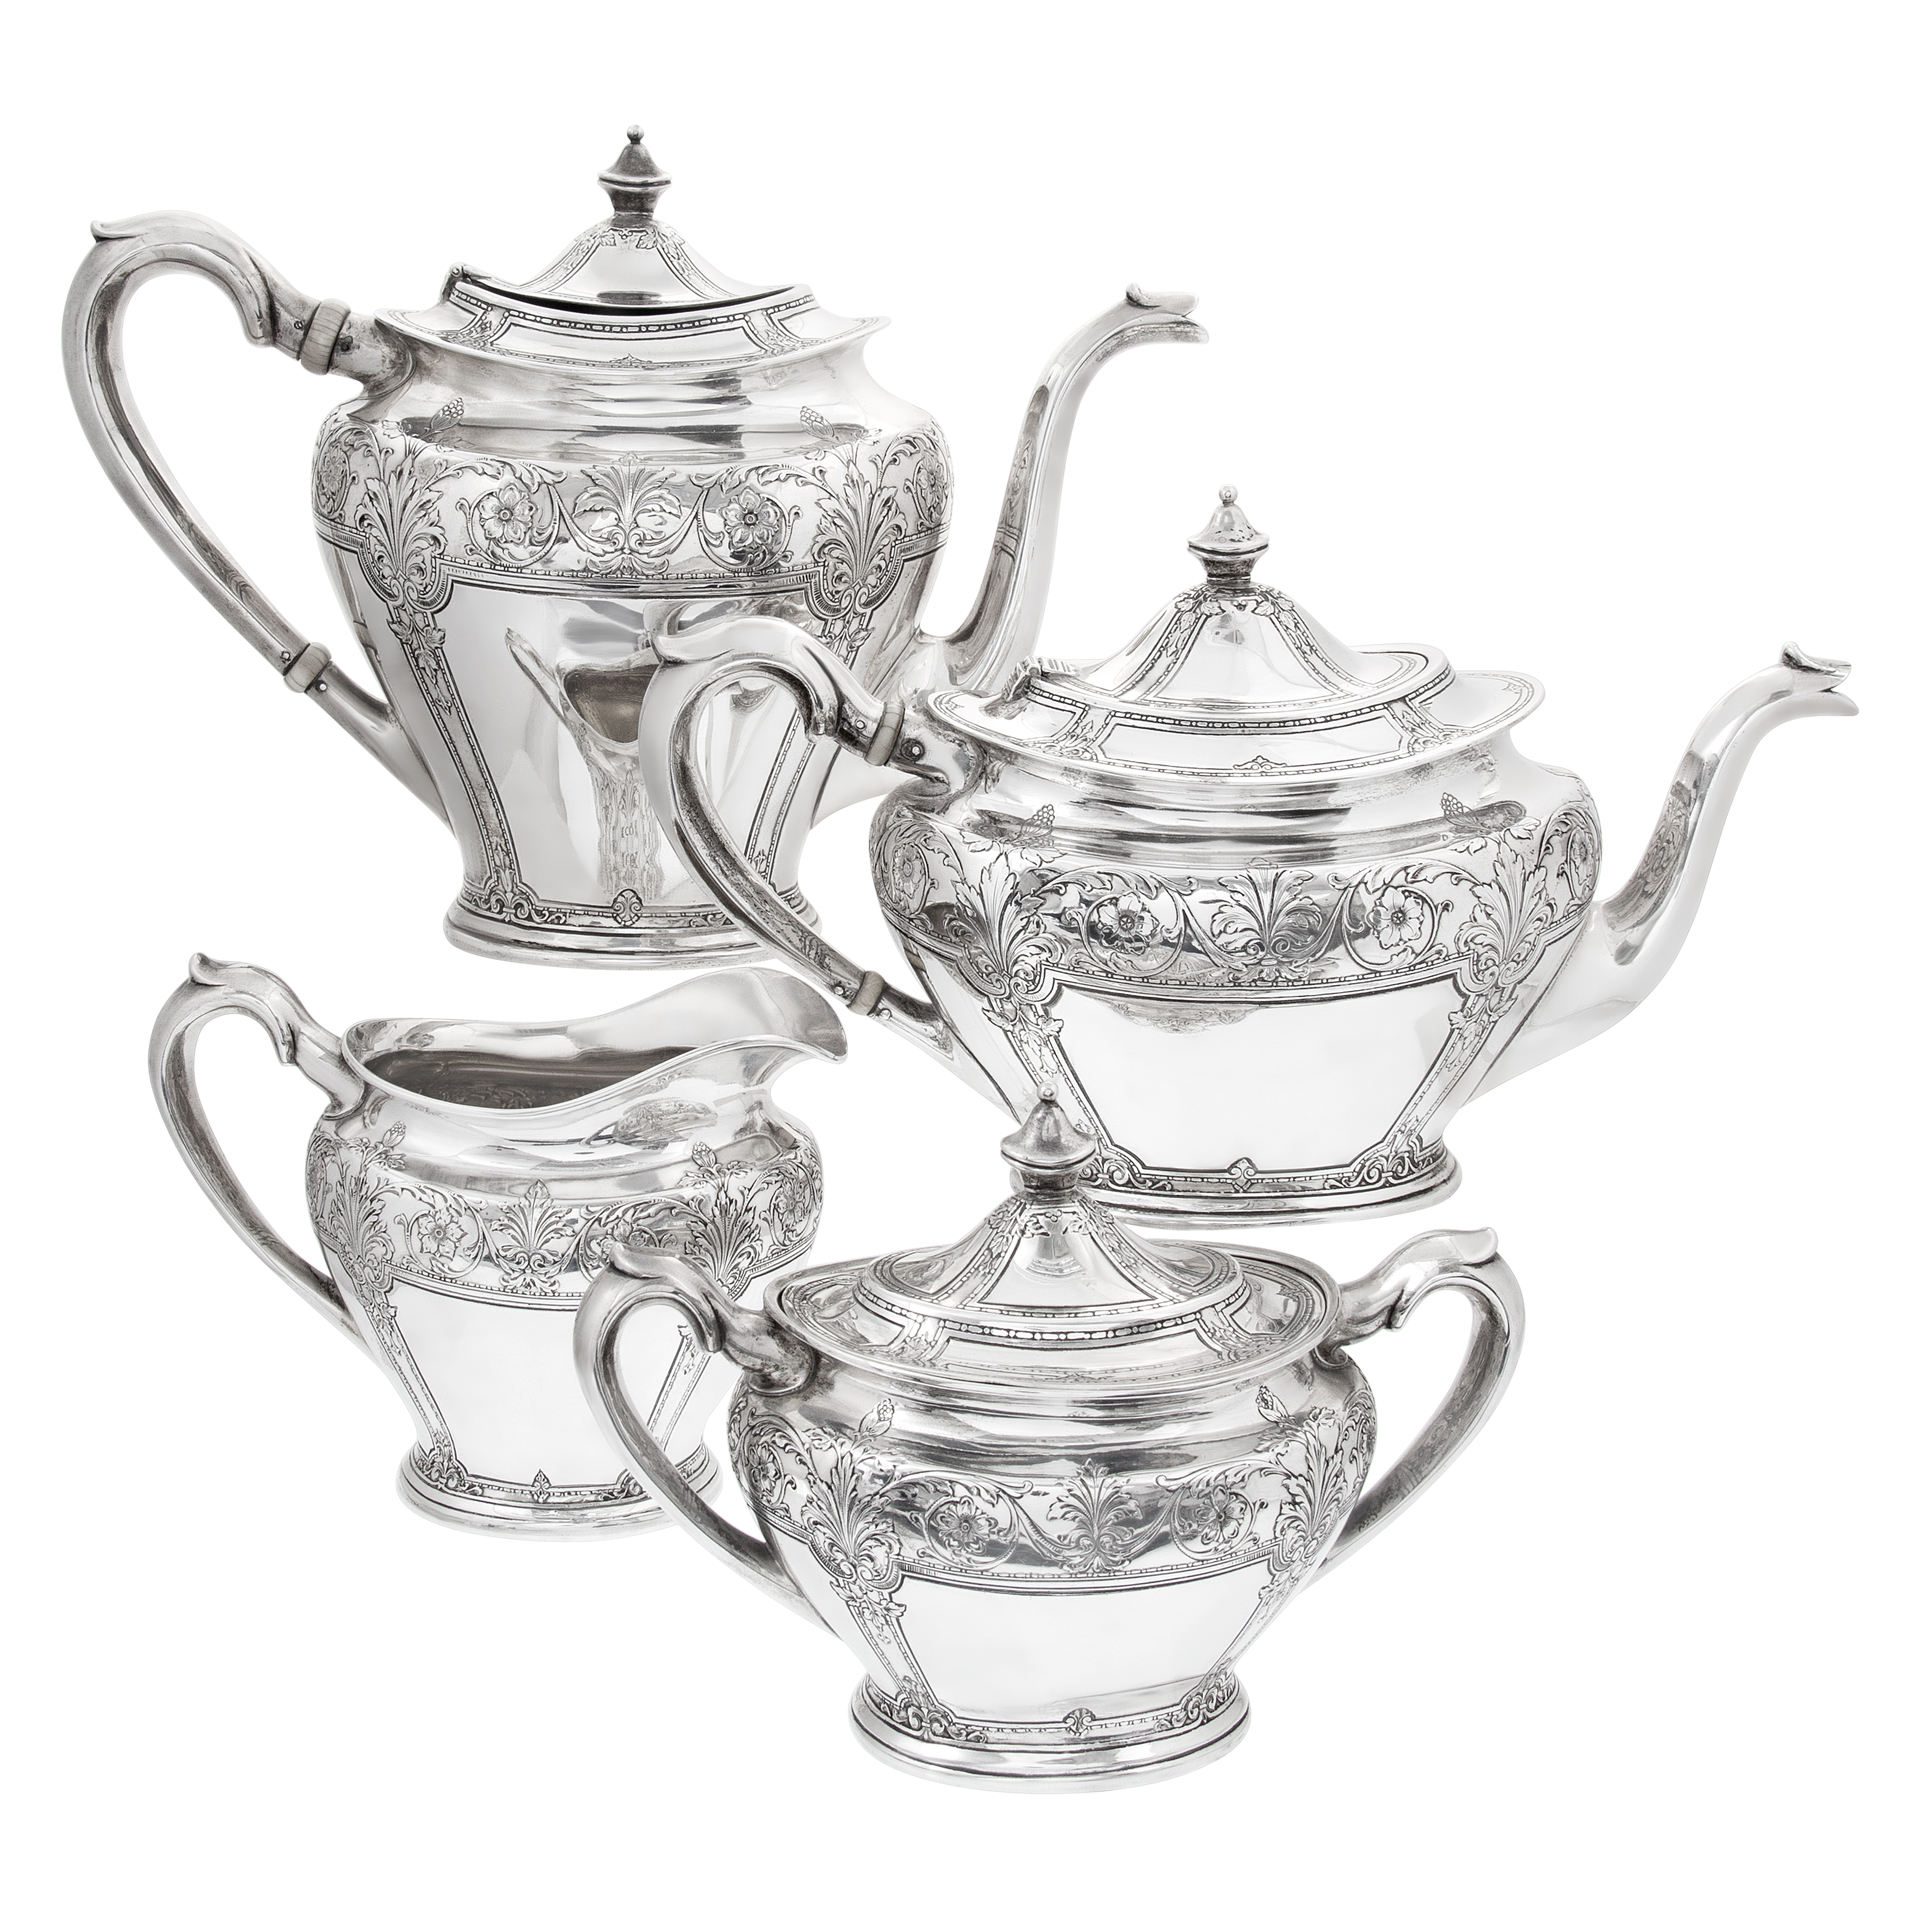 Victorian 4 pieces tea & coffee sterling silver set, by the Lebkuecher & Co Sterling Silver Company from Newark, New Jersey image 1